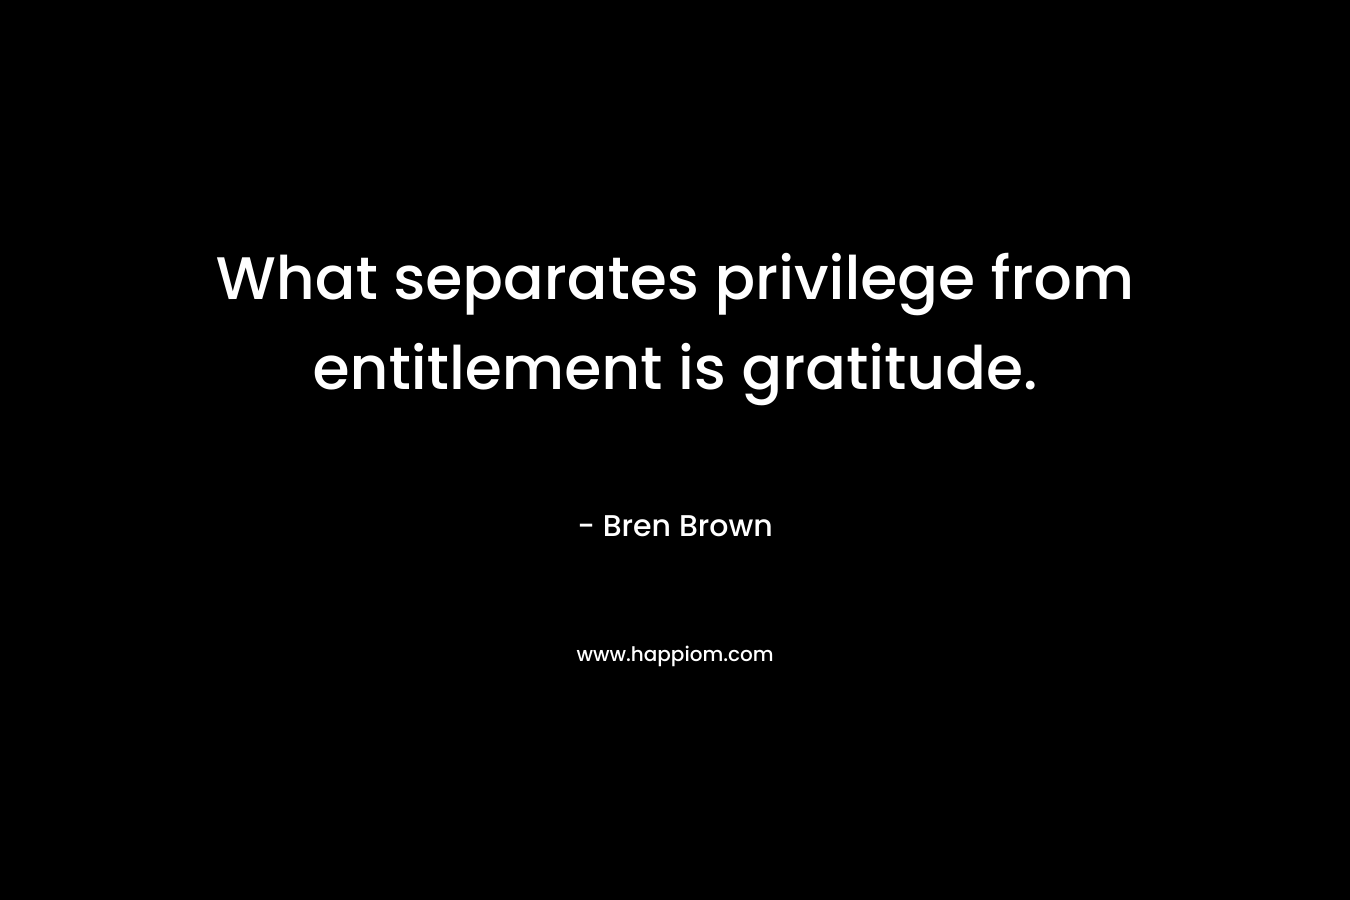 What separates privilege from entitlement is gratitude.